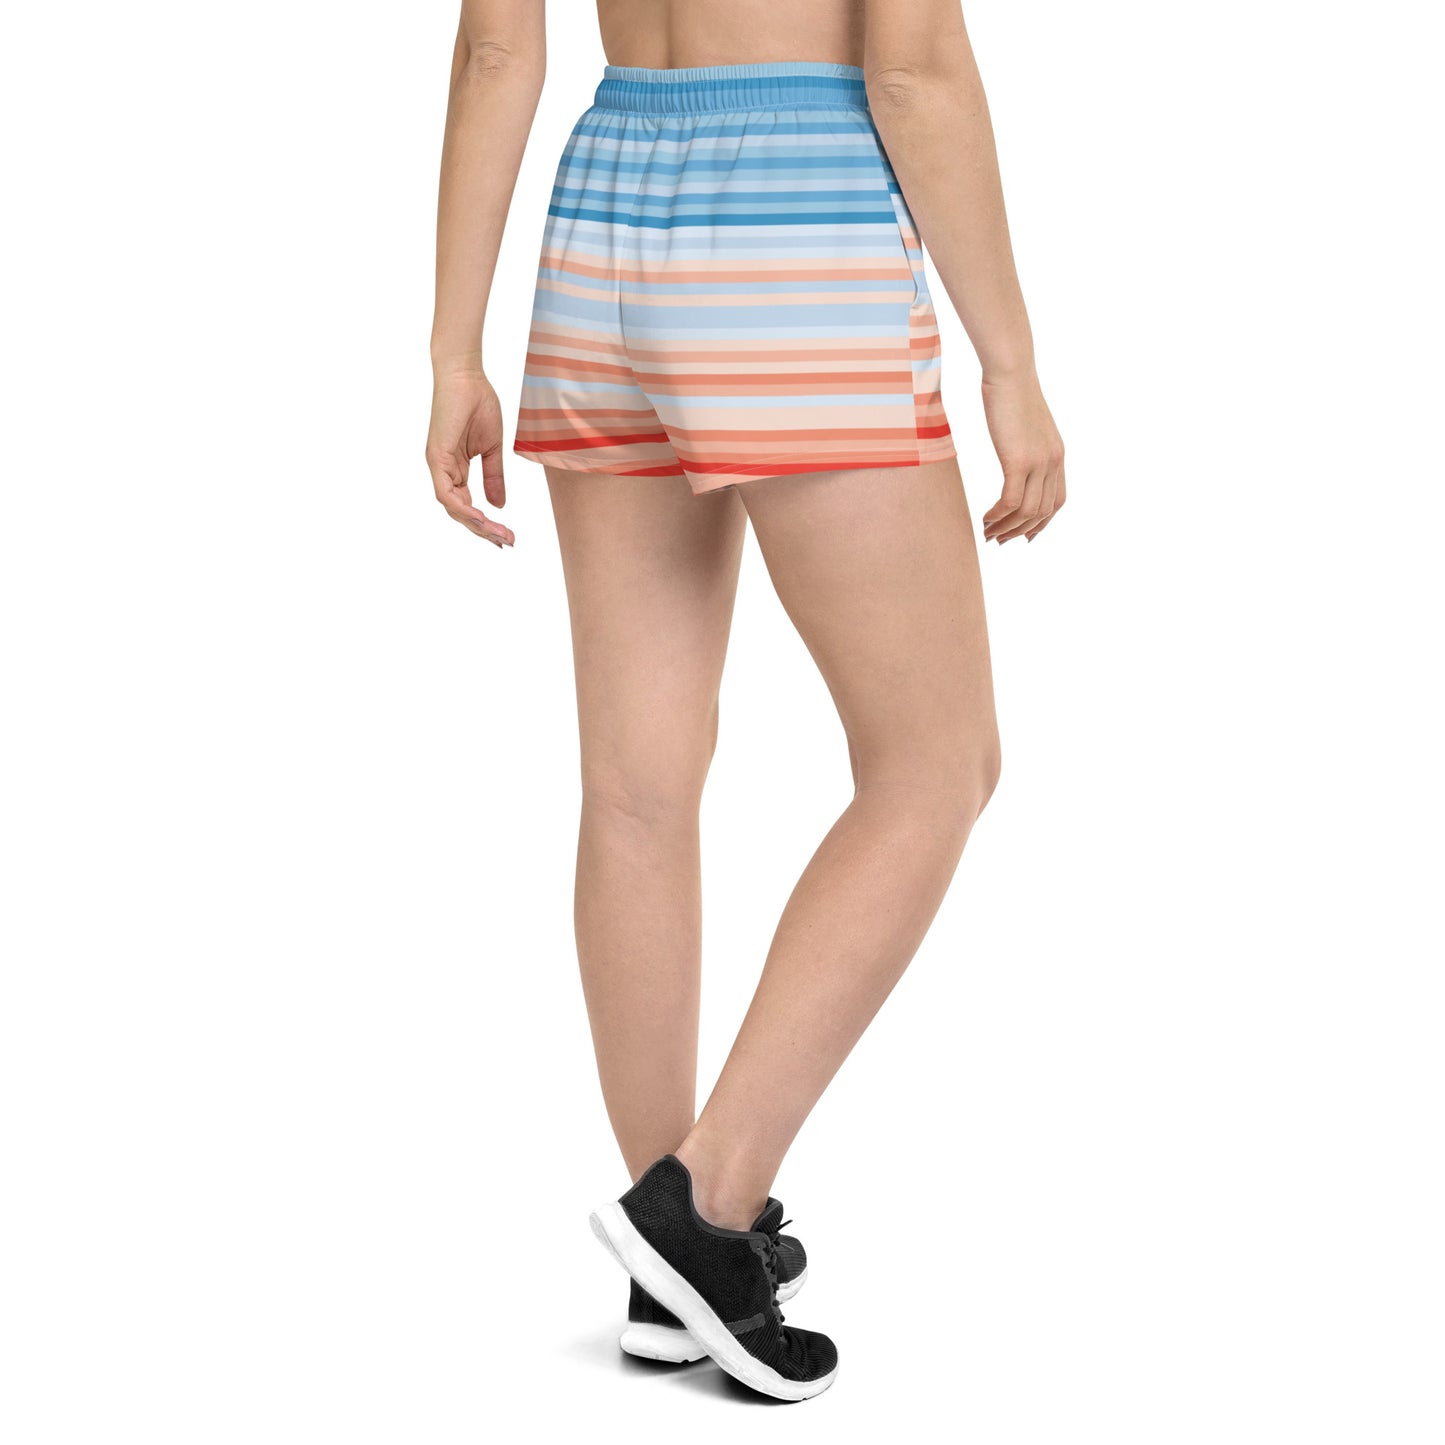 Climate Change Global Warming Stripes - Sustainably Made Women’s Recycled Athletic Shorts